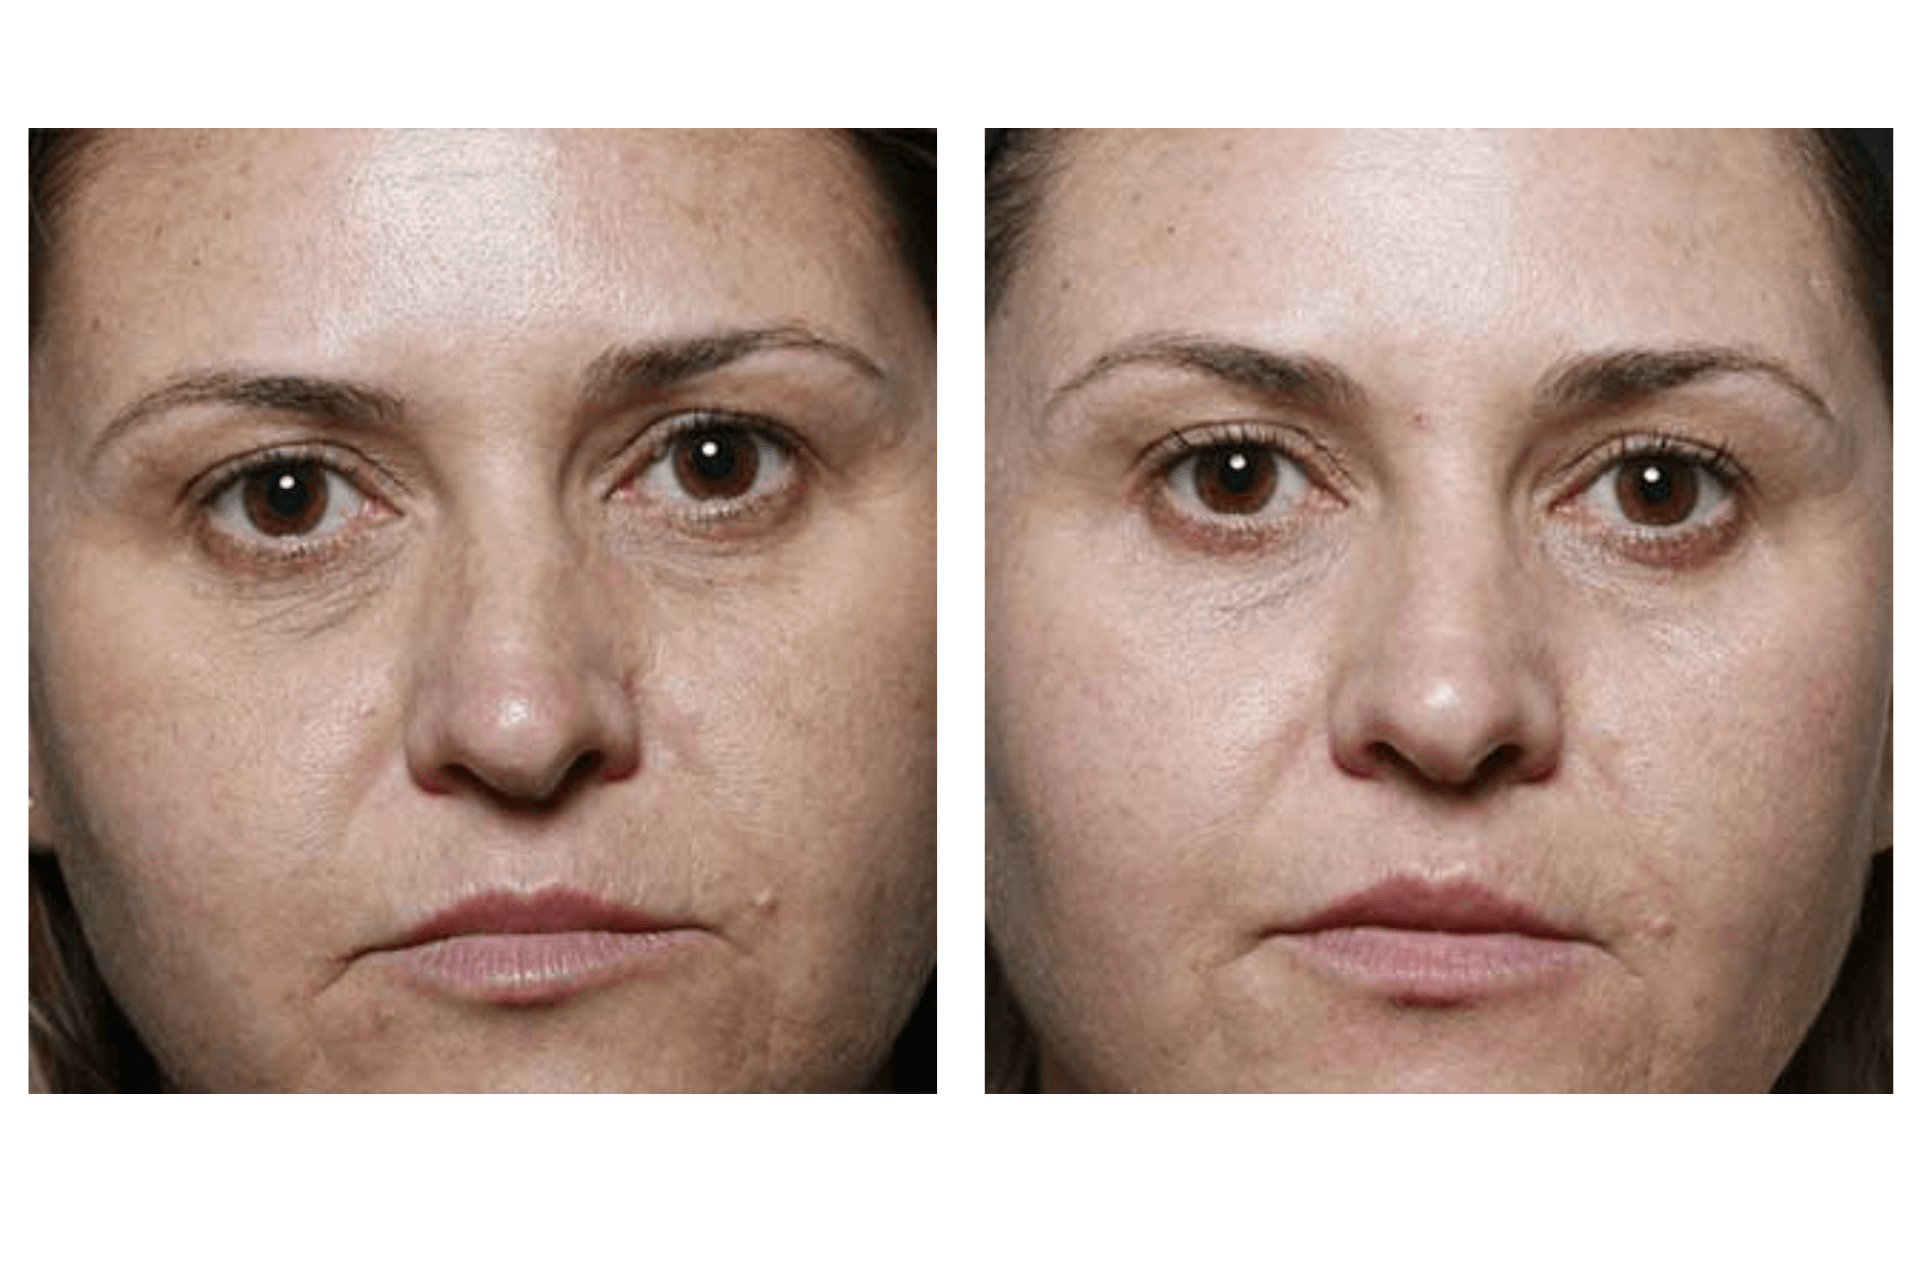 The before and after results of a patient who has undergone a Clear + Brilliant session